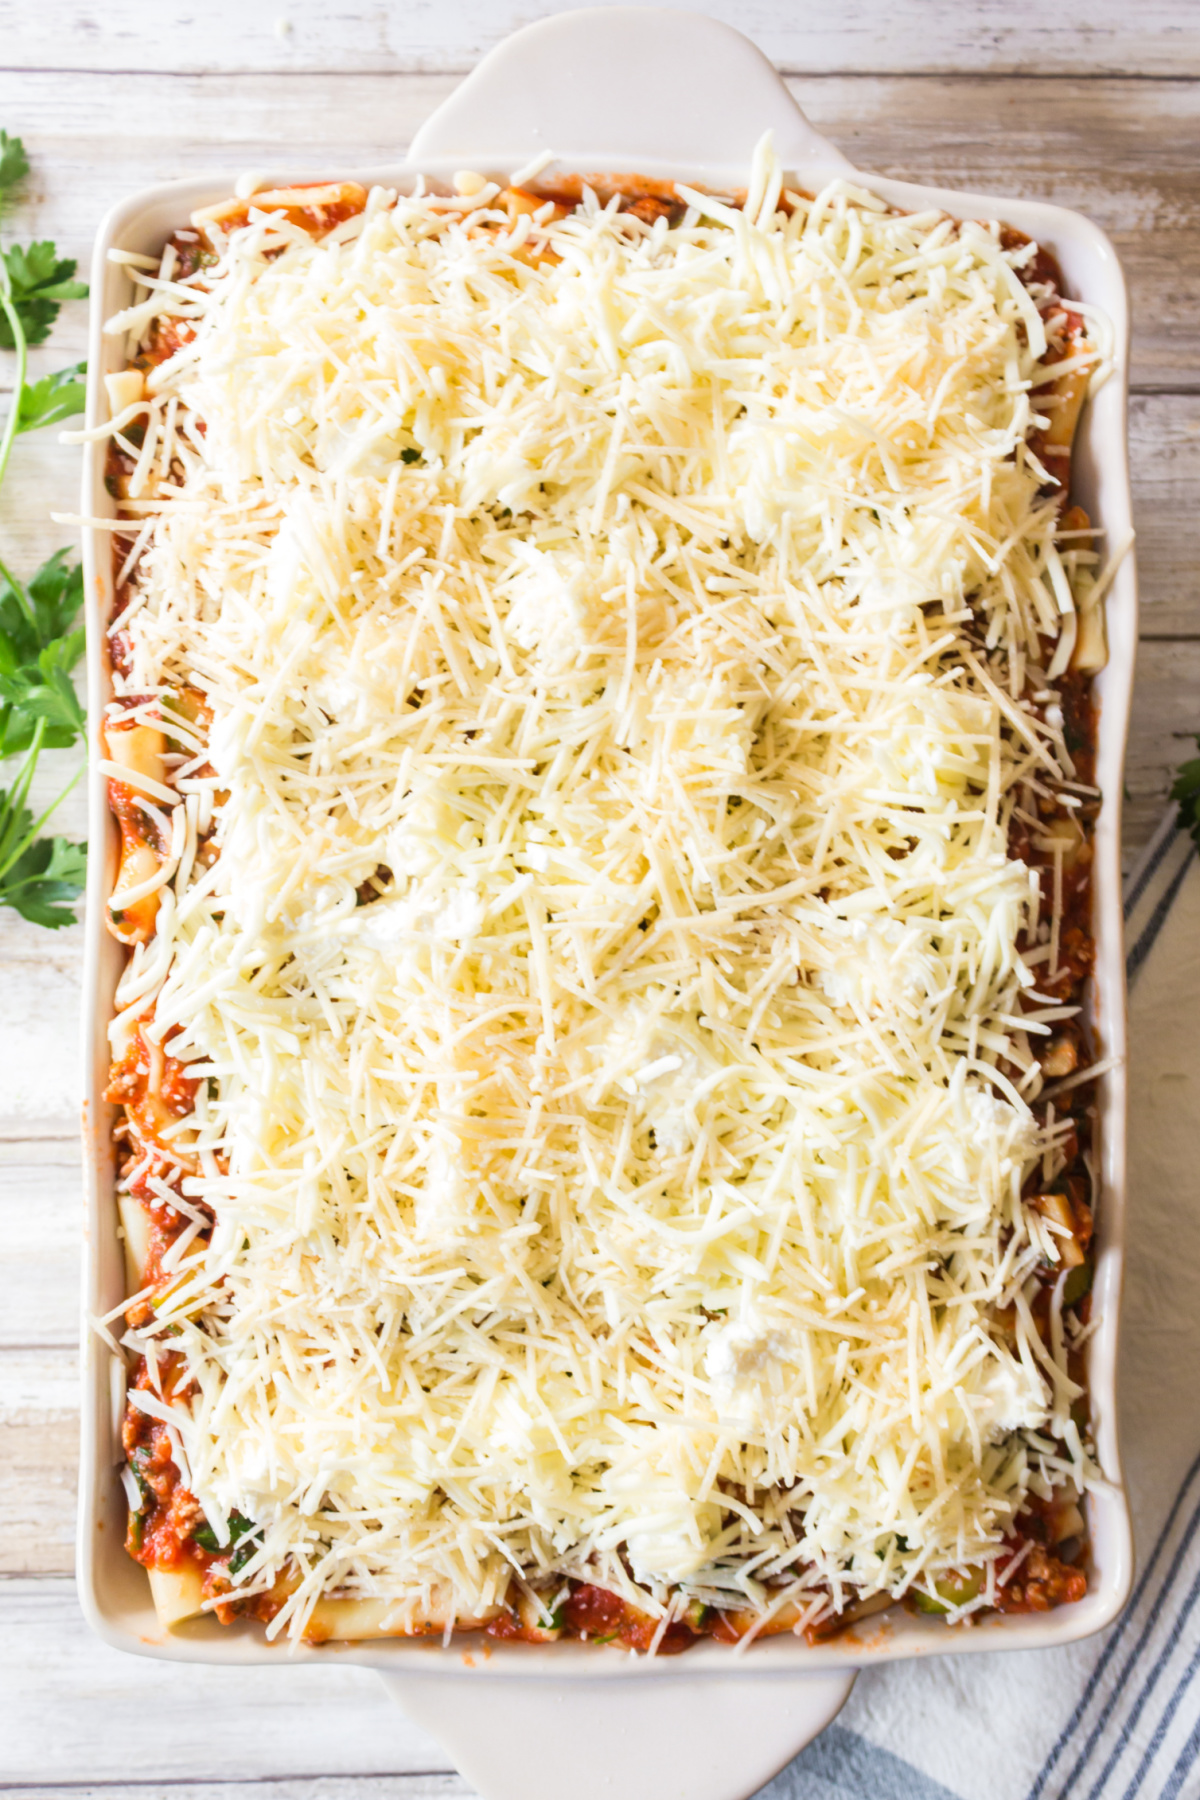 An unbaked ziti dish topped with shredded cheese in a white casserole dish.